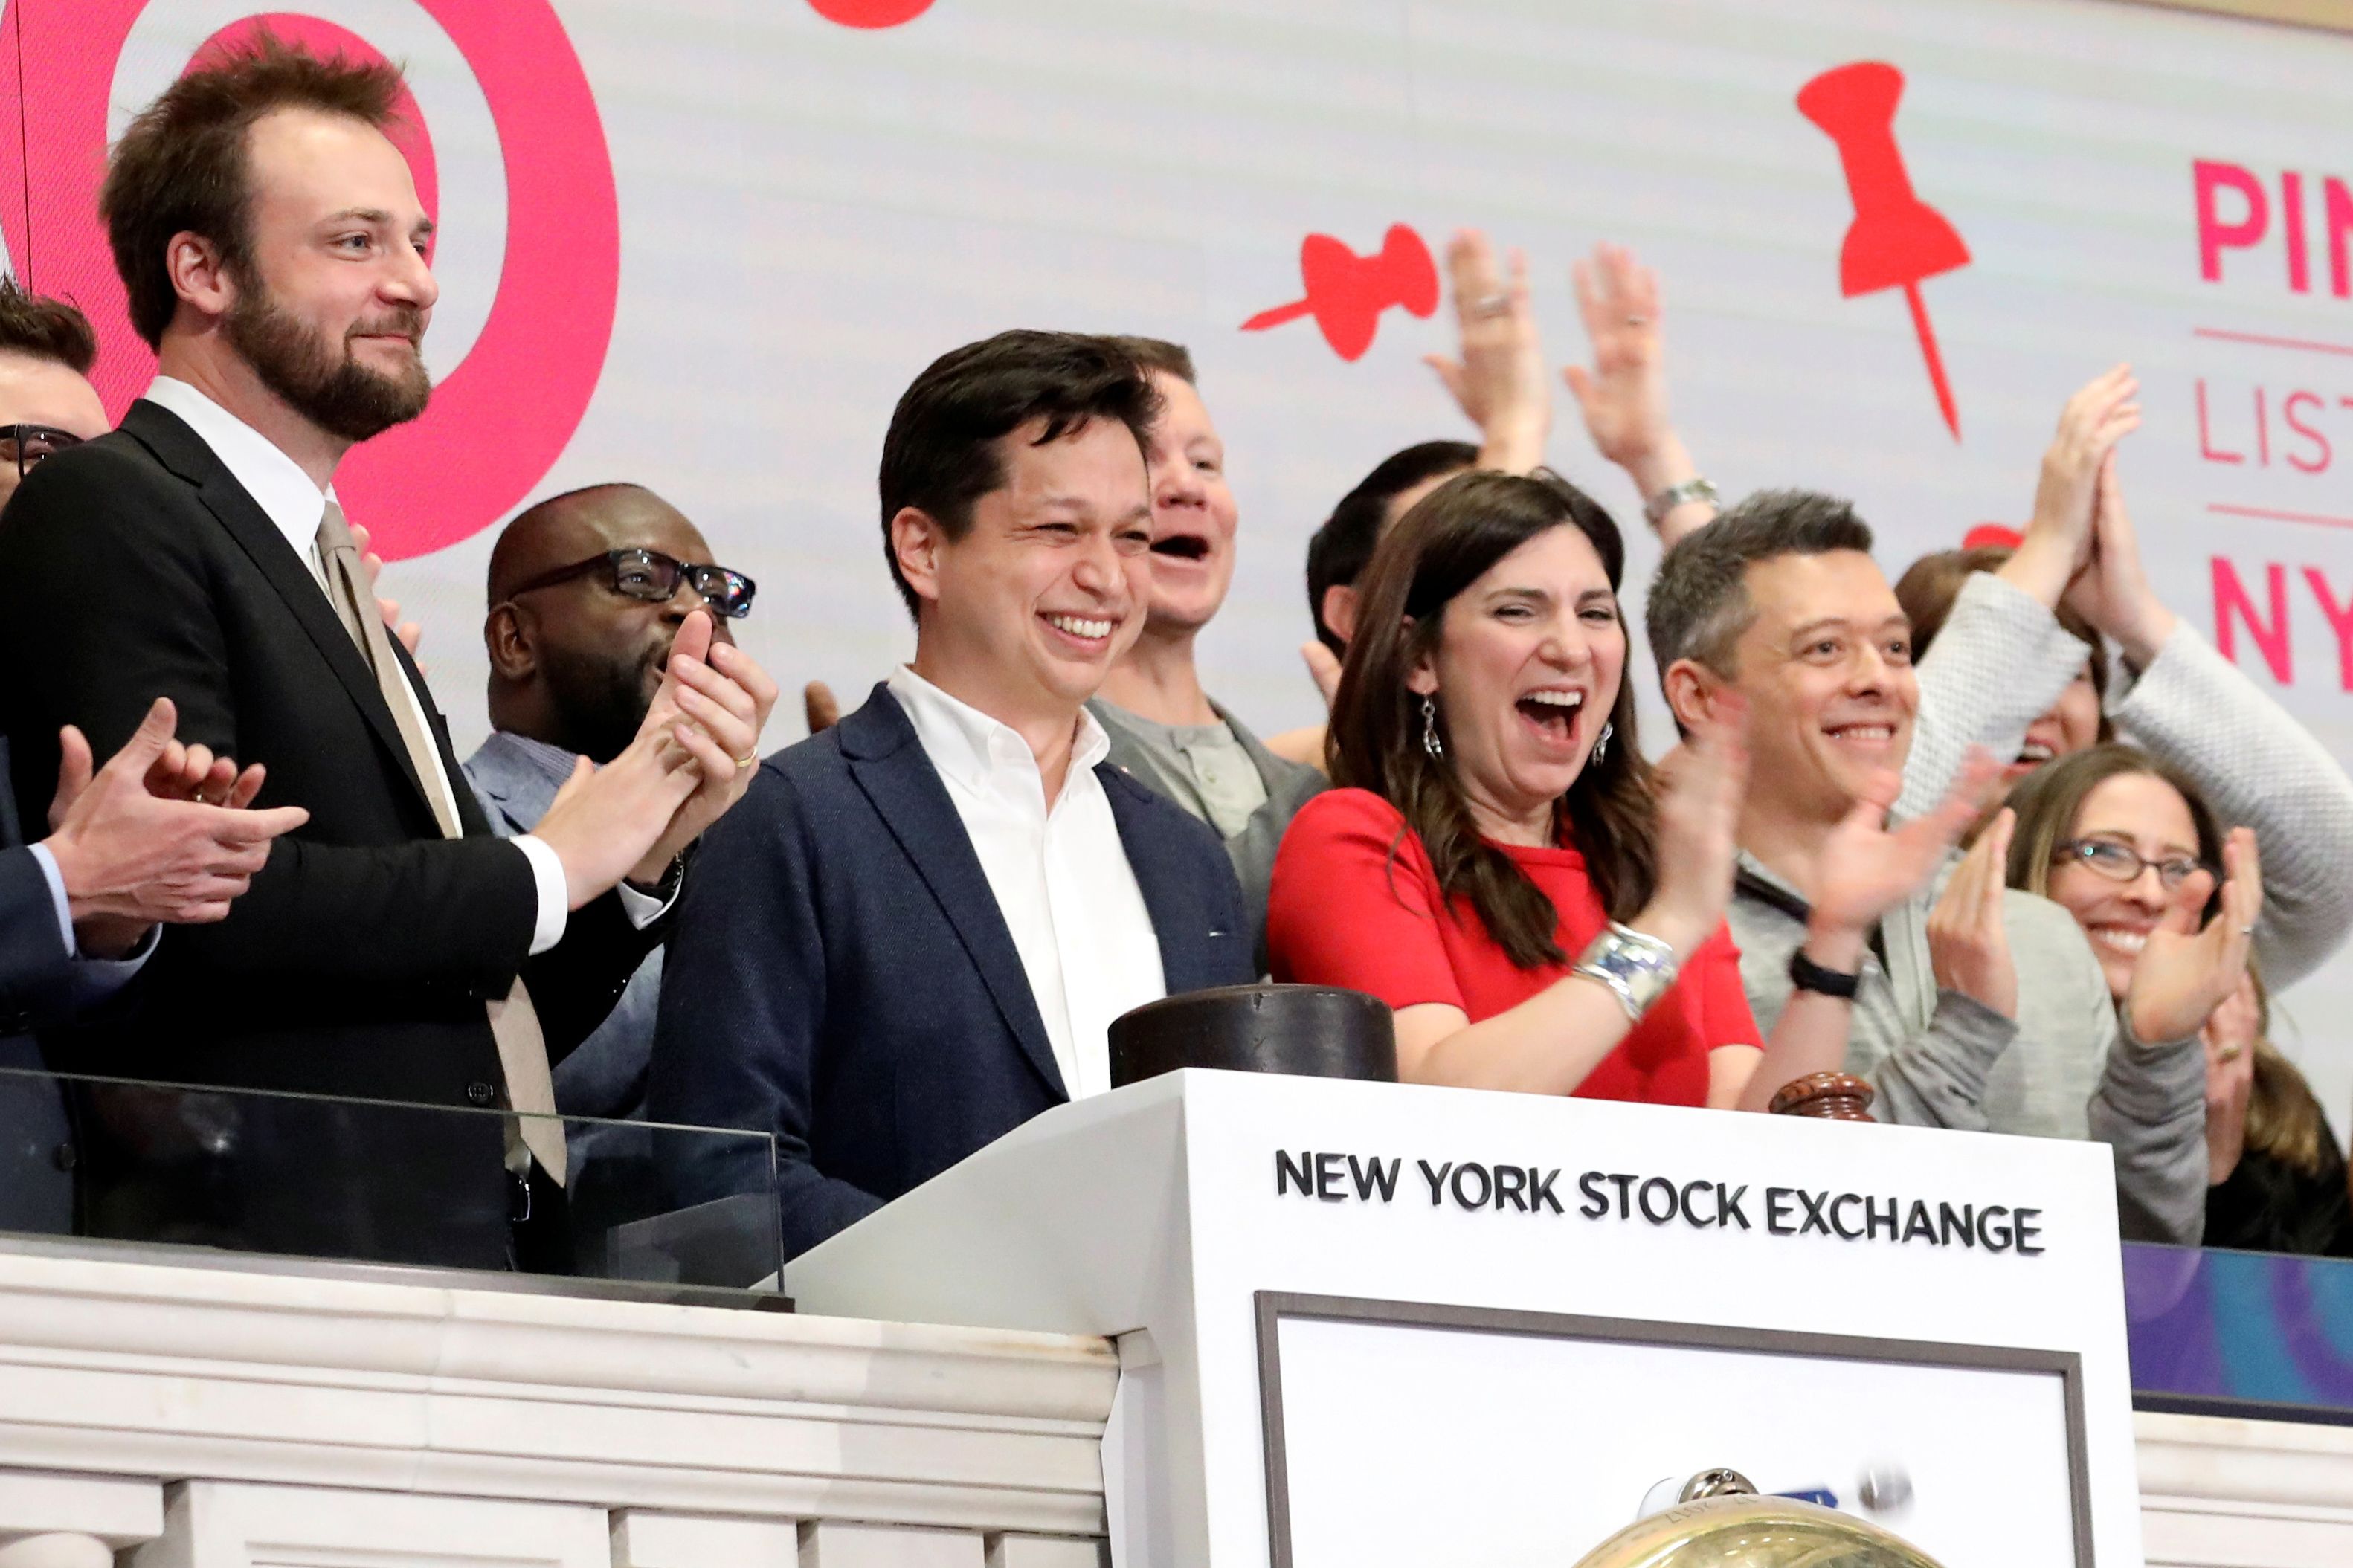 IPOs from Uber, Pinterest, Zoom produced record exits in Q2: PitchBook